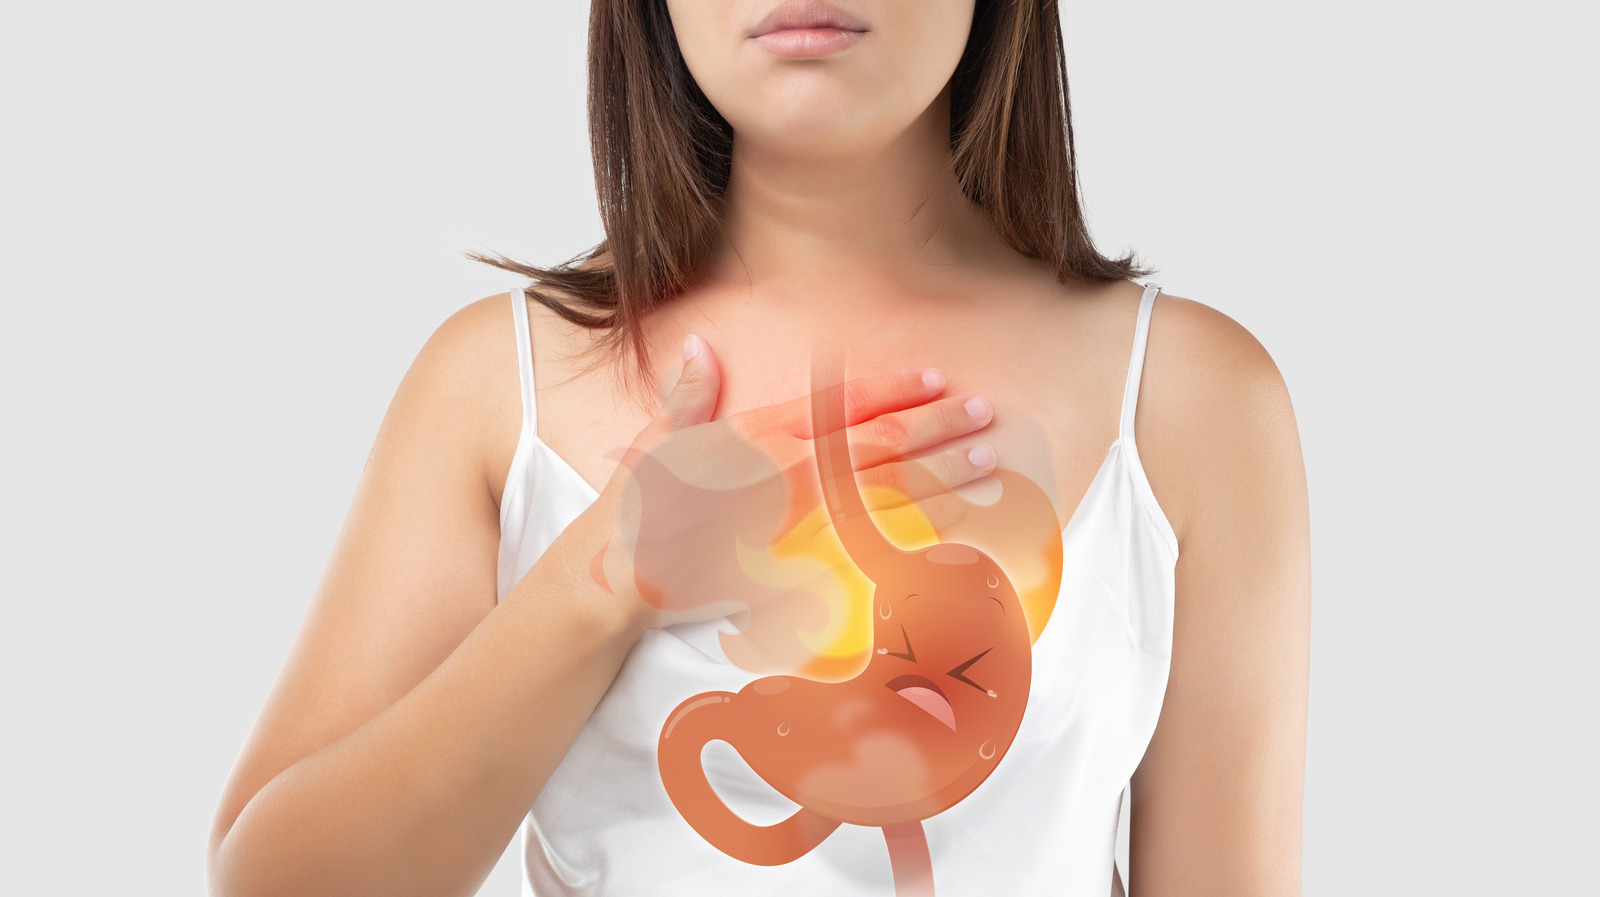 Acid Reflux Explained: Causes, Symptoms, And Treatments